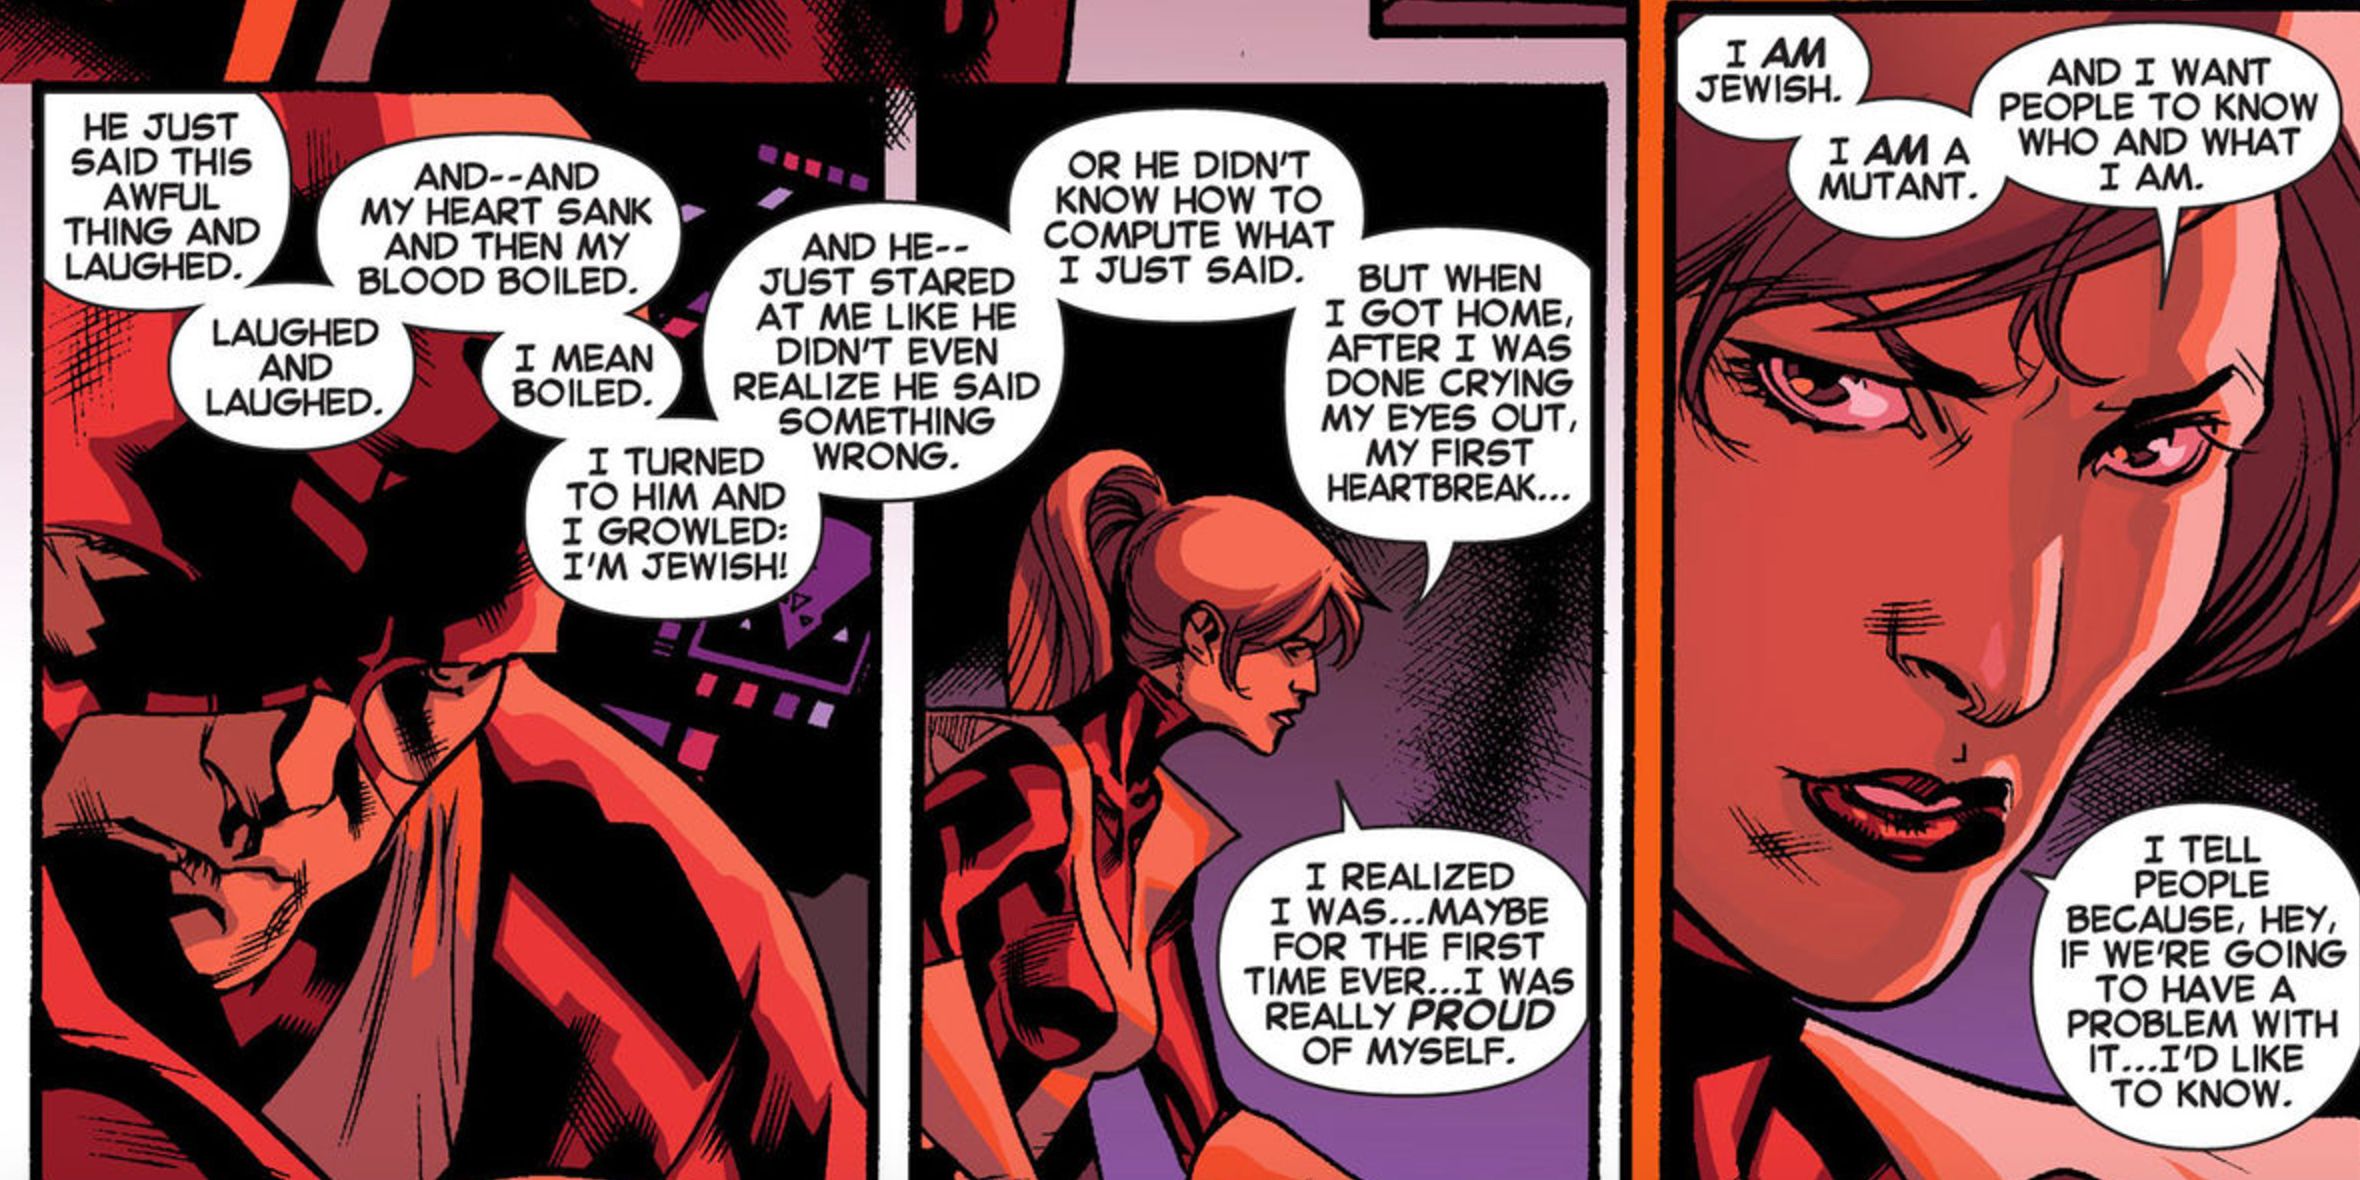 Kitty Pryde on Being Jewish and a Mutant